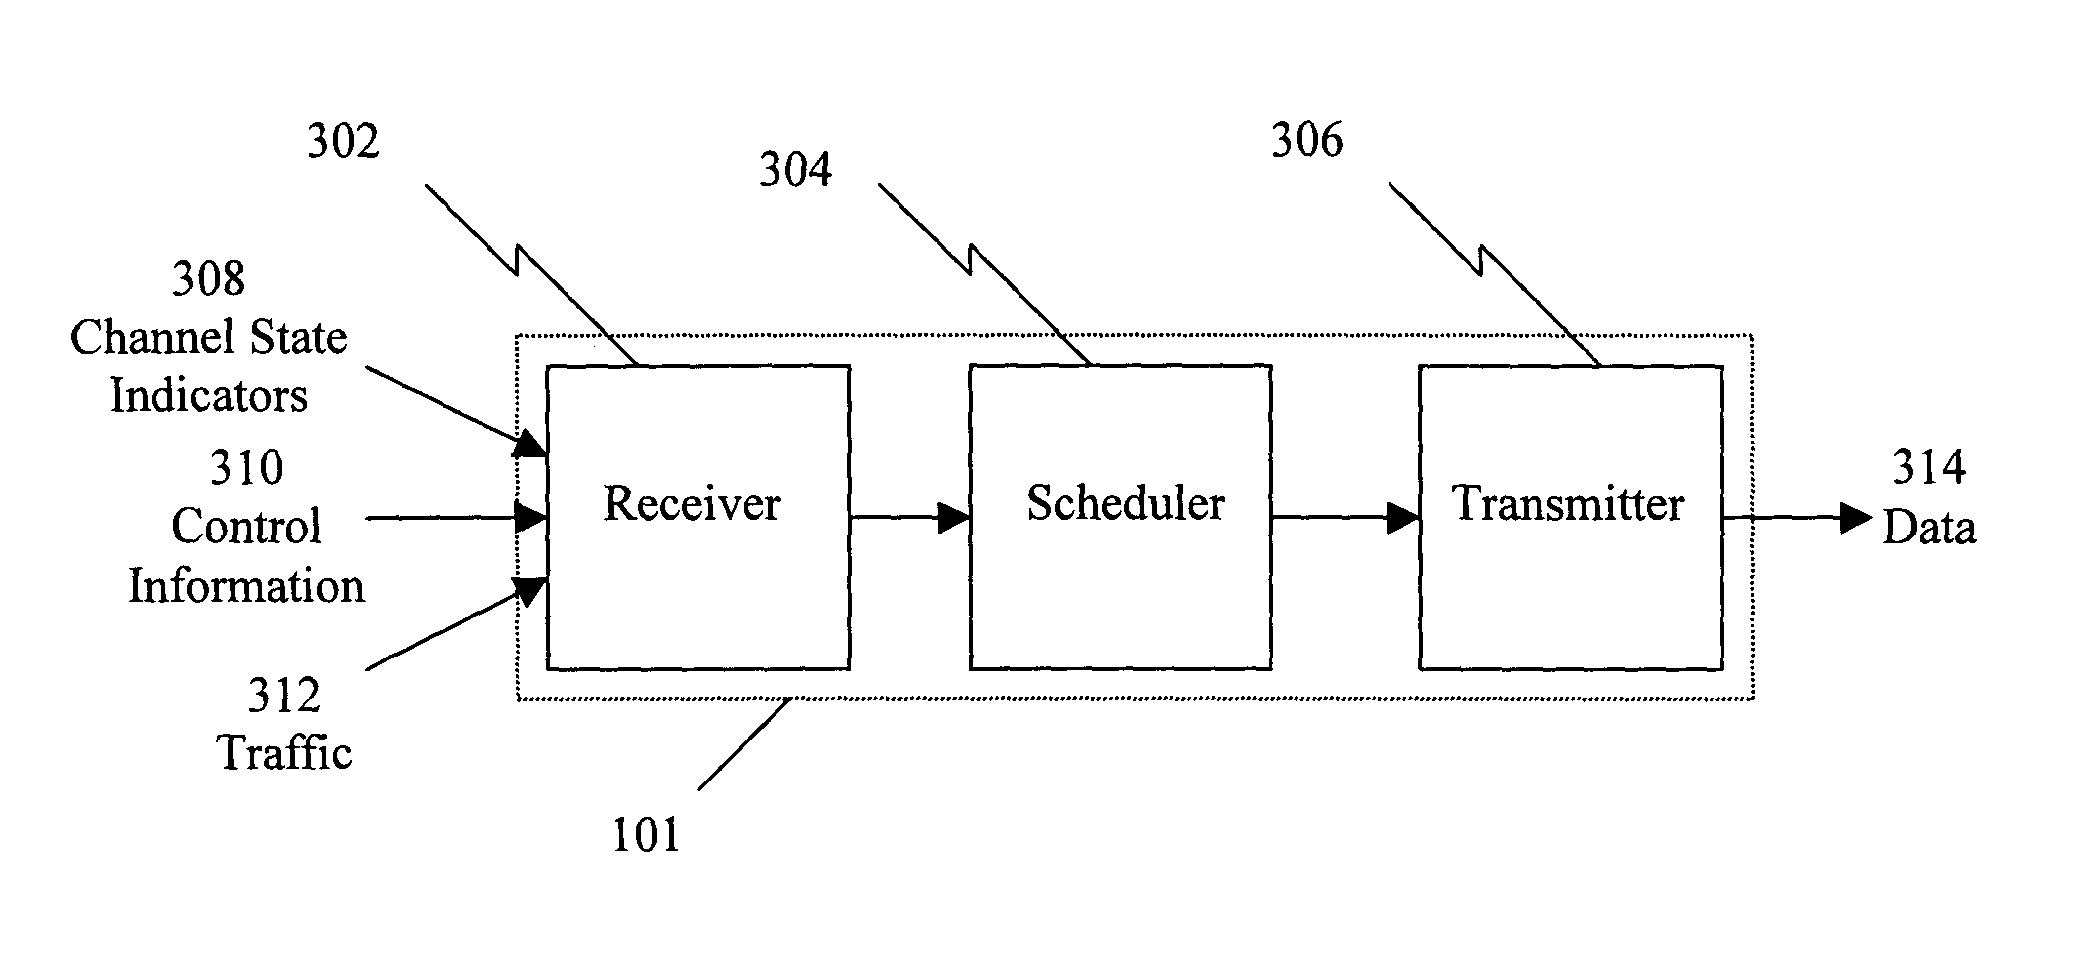 Scheduling of wireless packet data transmissions